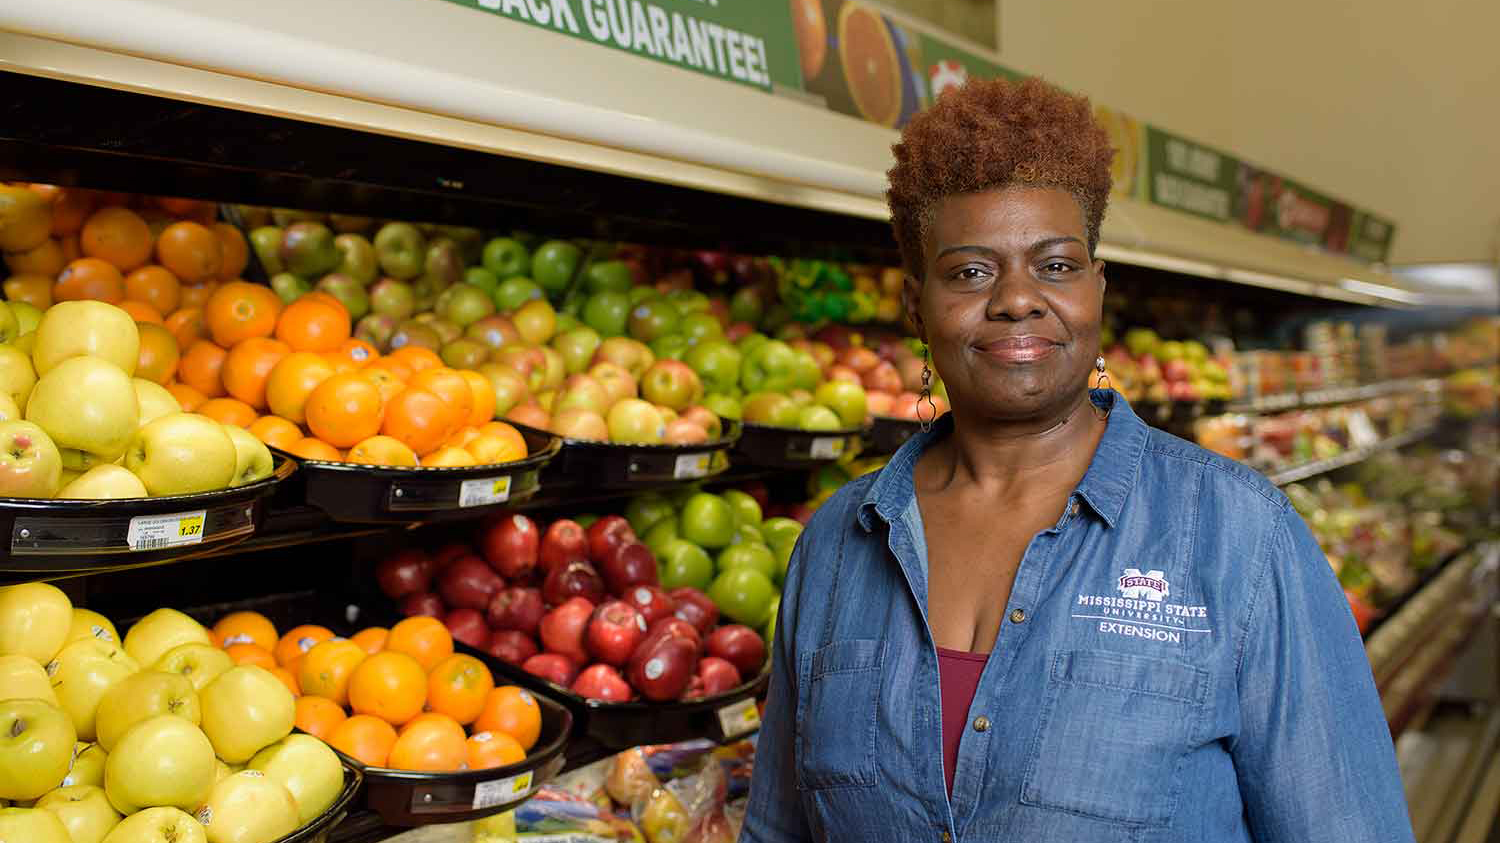 A woman, wearing a denim shirt, smiles in front of a fruit display at a grocery store.